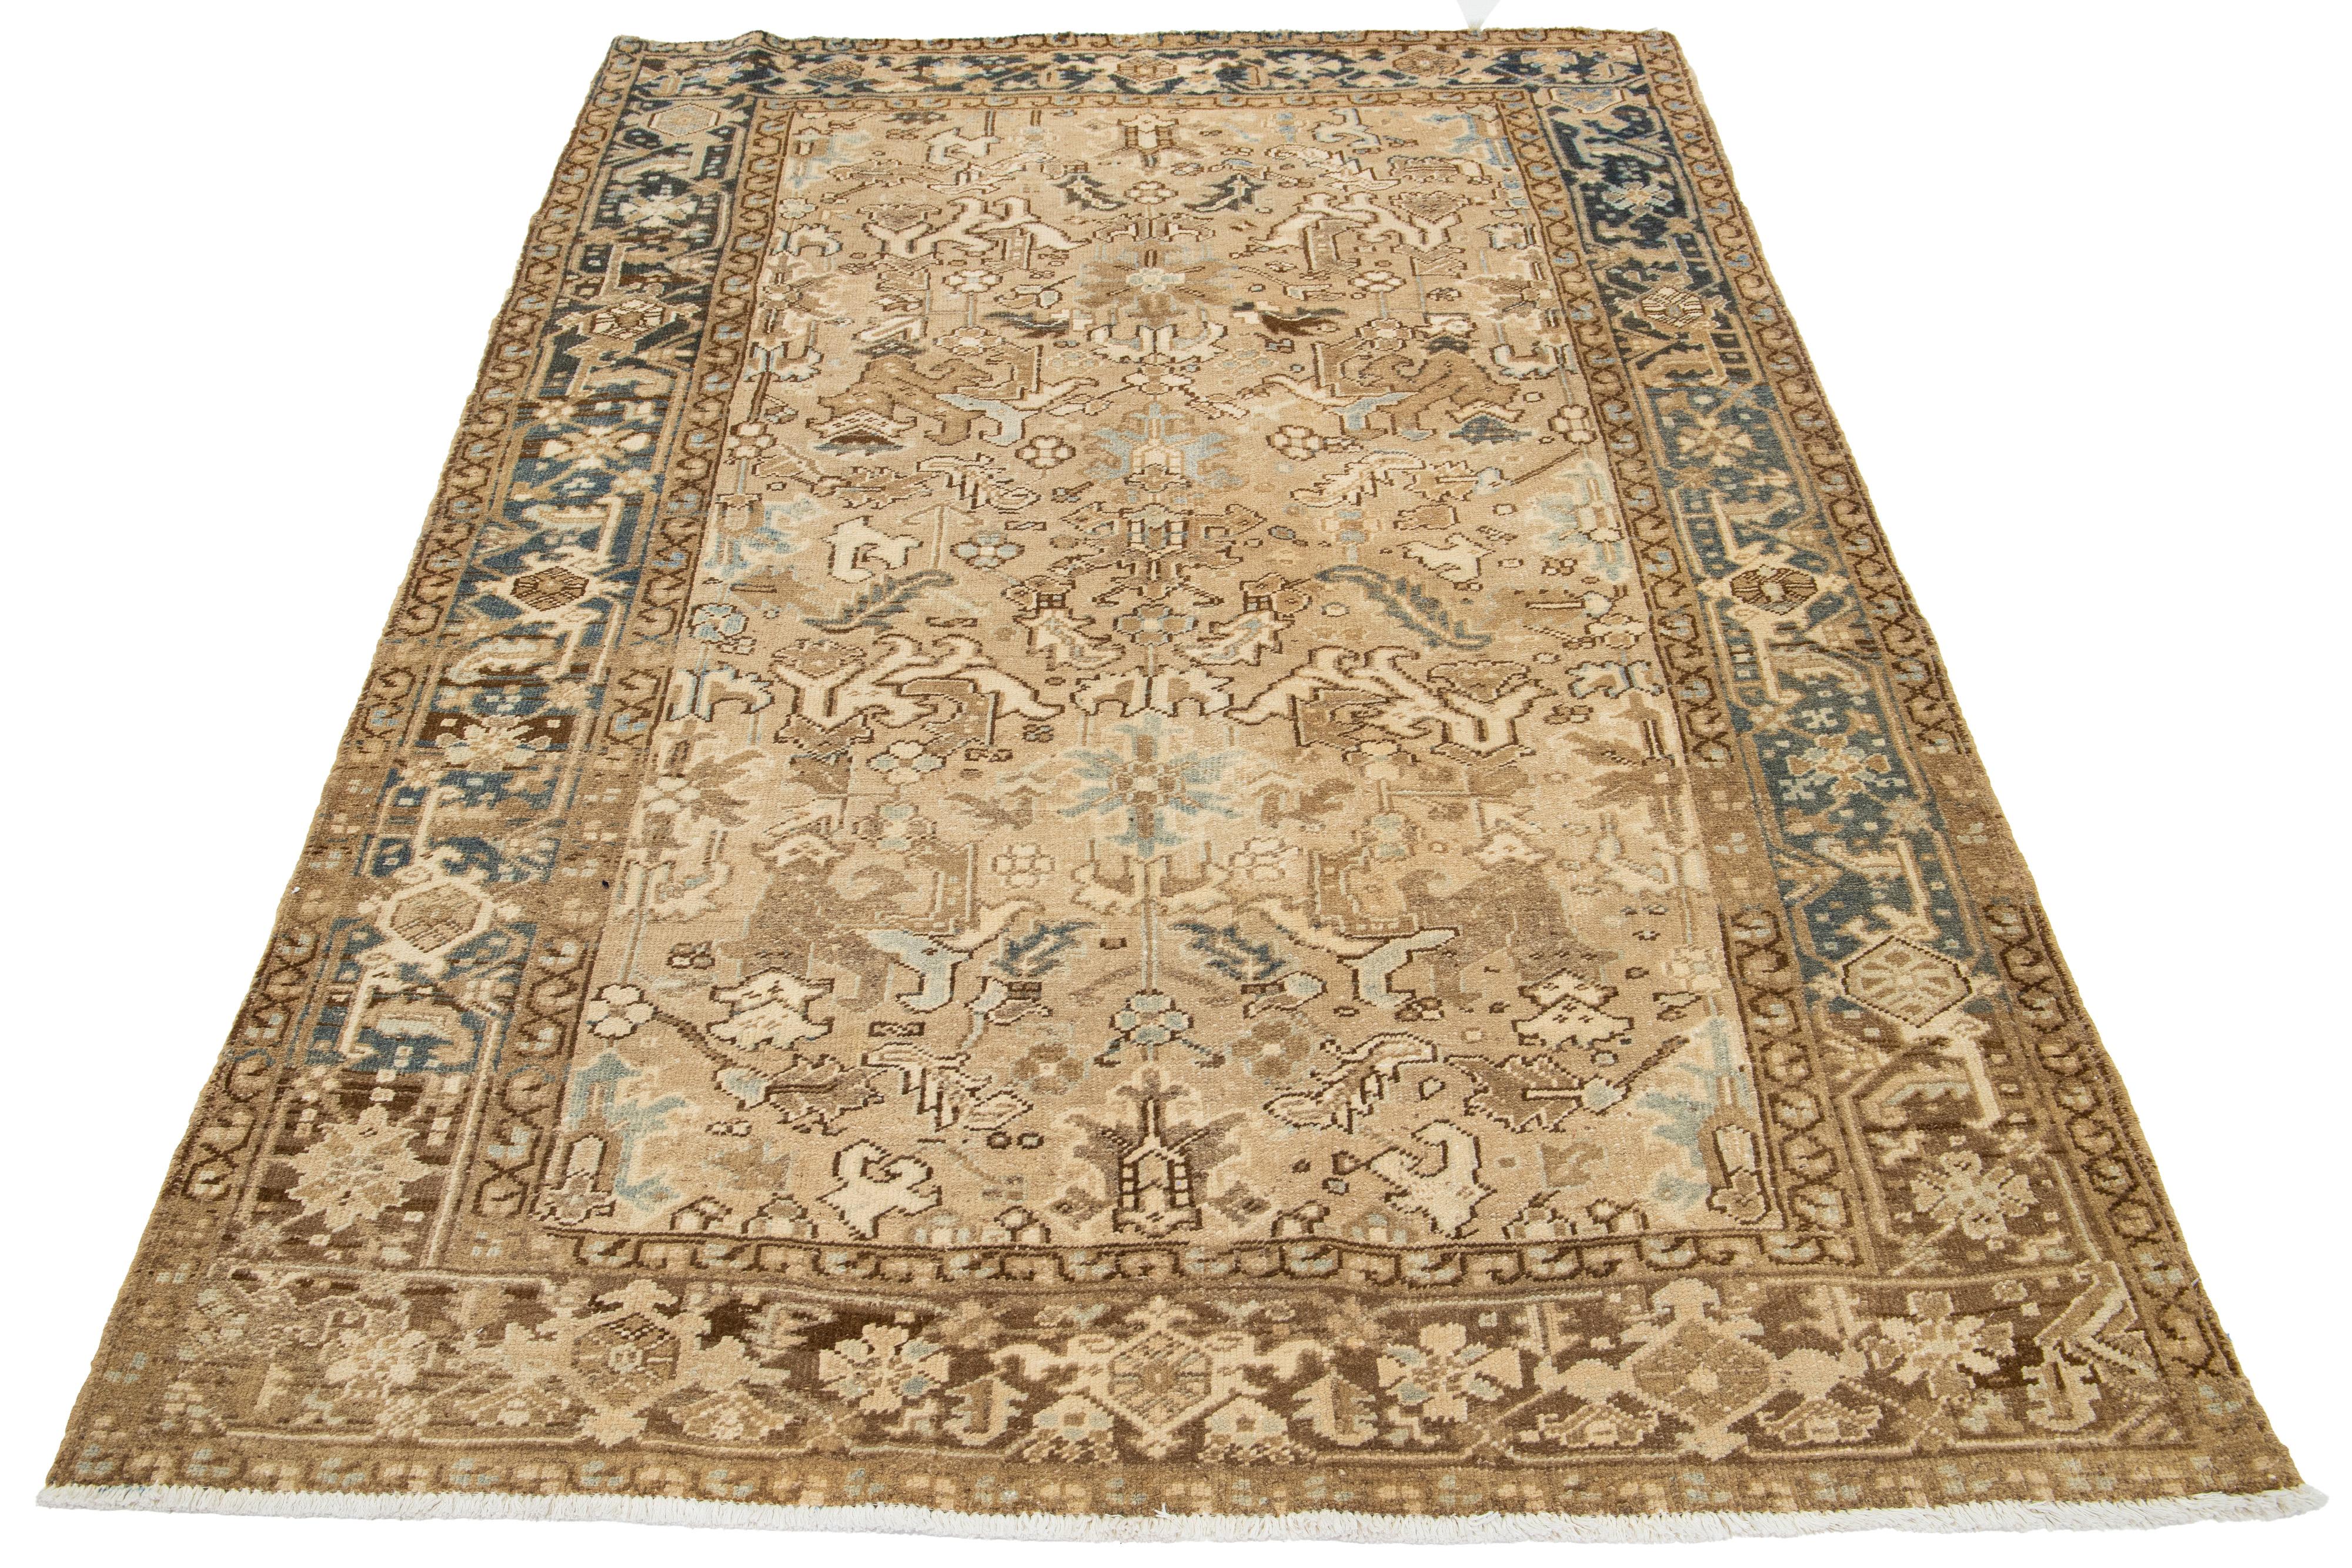 An antique Heriz rug from Persia is hand-knotted using wool. It features a beige field with a blue and brown all-over pattern.

This rug measures 5'11' x 8'10